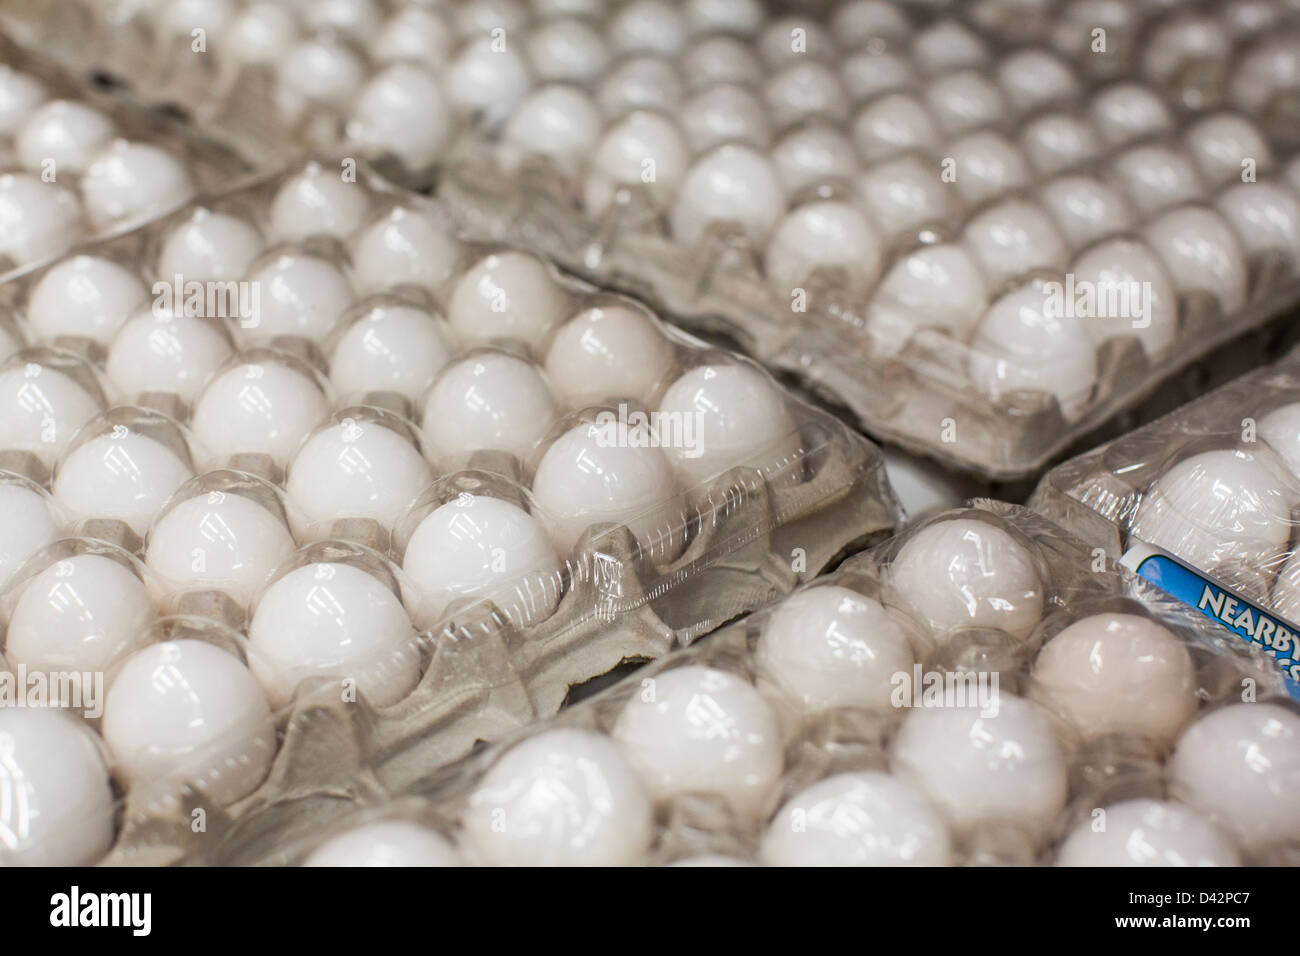 Eggs on display at a Costco Wholesale Warehouse Club. Stock Photo